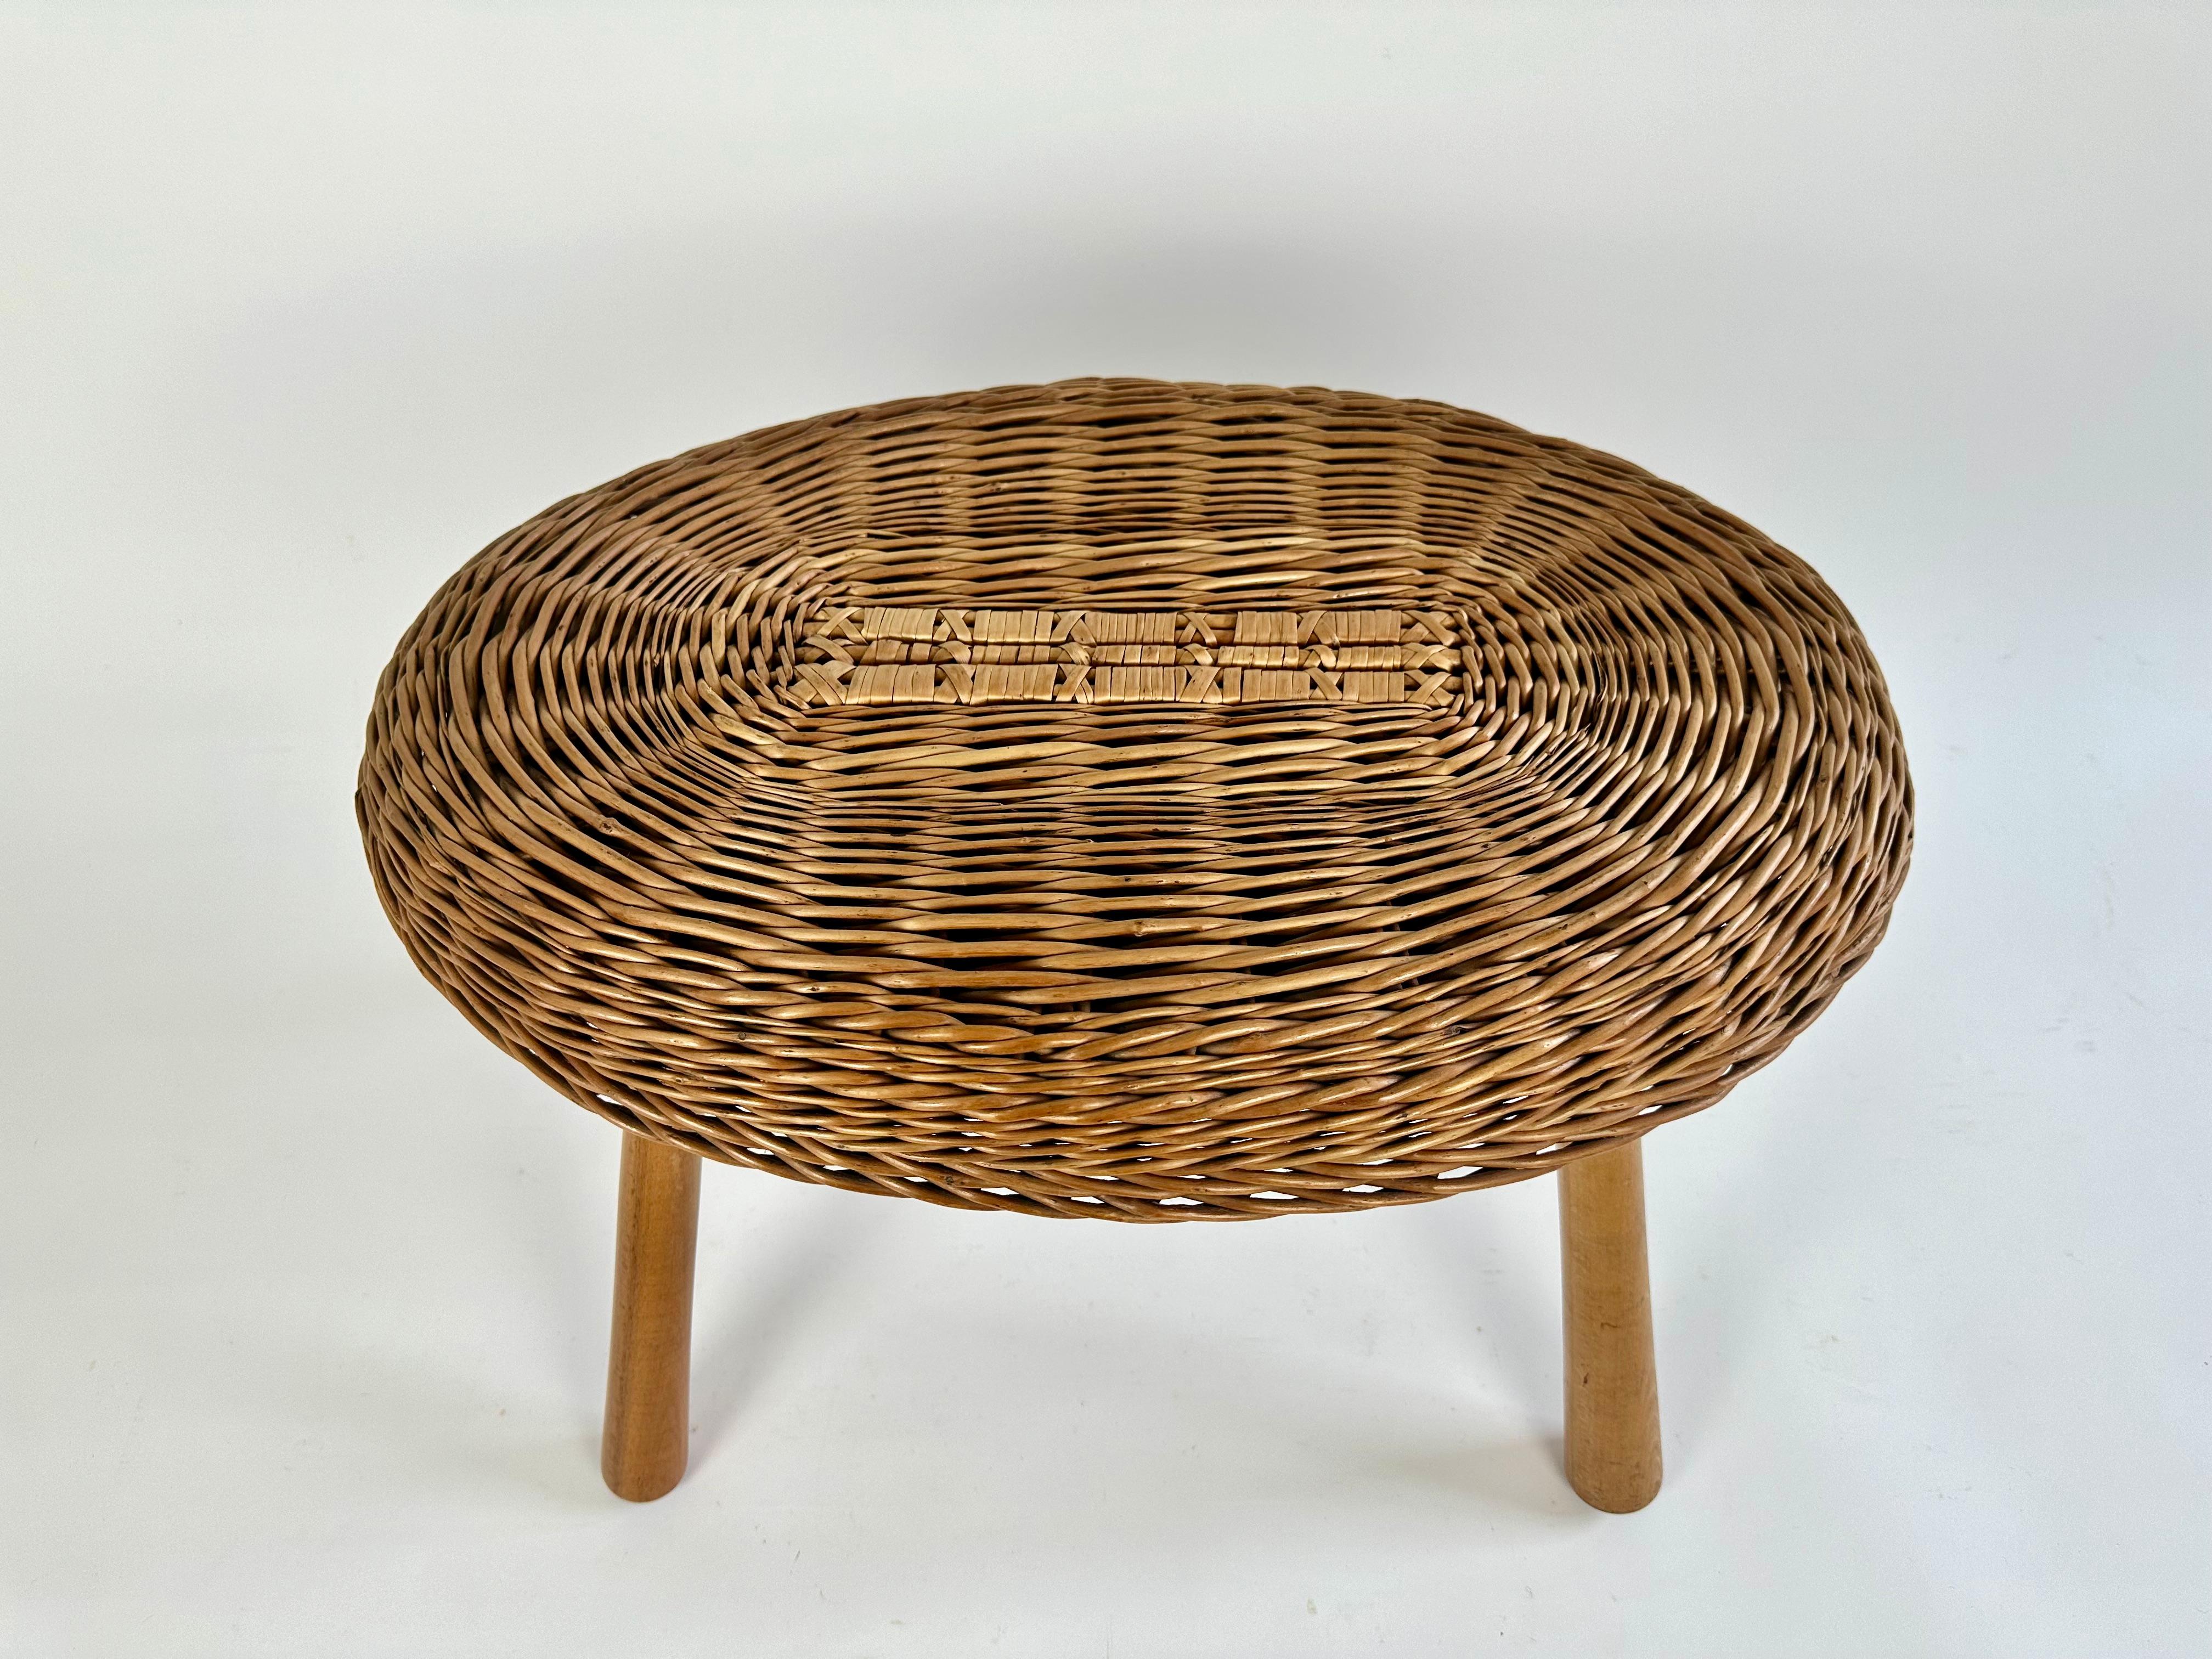 Vintage side table in the manner of Tony Paul, circa 1950-60

Woven wicker top on beech legs. 

Great vintage condition. No repairs or restoration, cleaned ready for use.

Worldwide shipping

